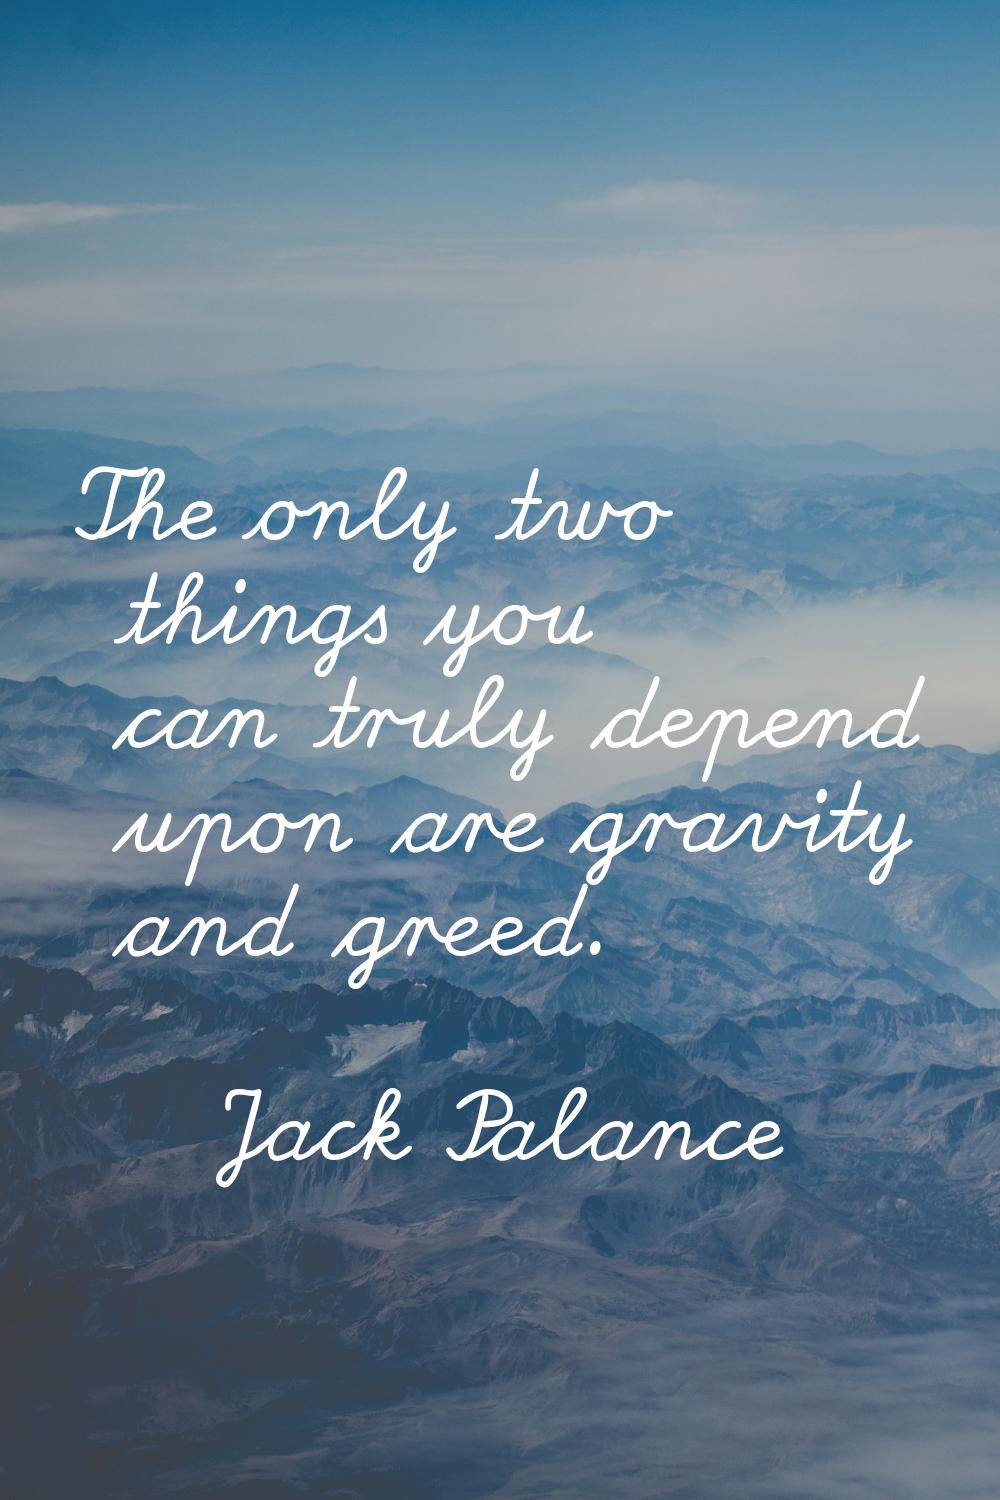 The only two things you can truly depend upon are gravity and greed.